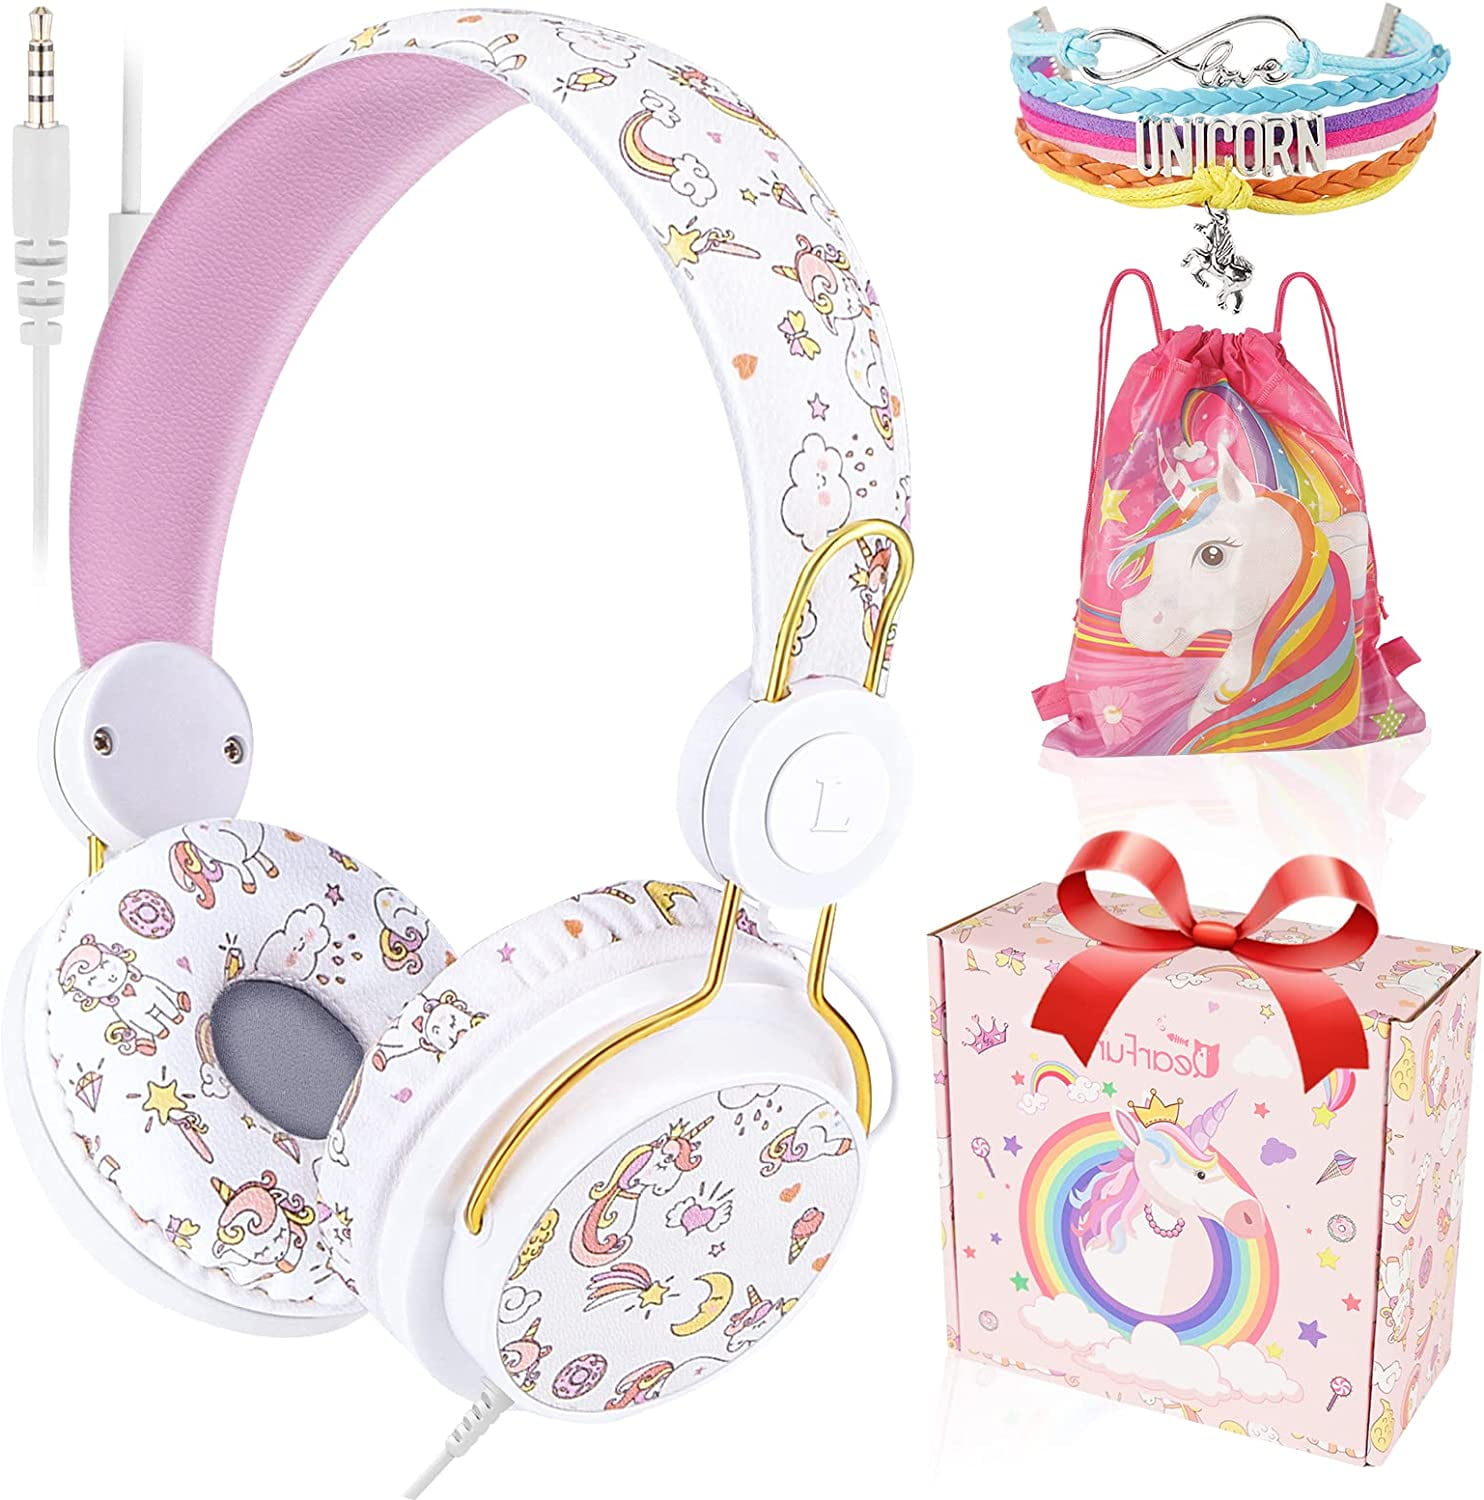 TCJJ Cat Earbuds for Kids, Kawakii Wired Earbud & in-Ear Headphones Gift for School Girls and Boys Toddler with Microphone and Lovely Earphones